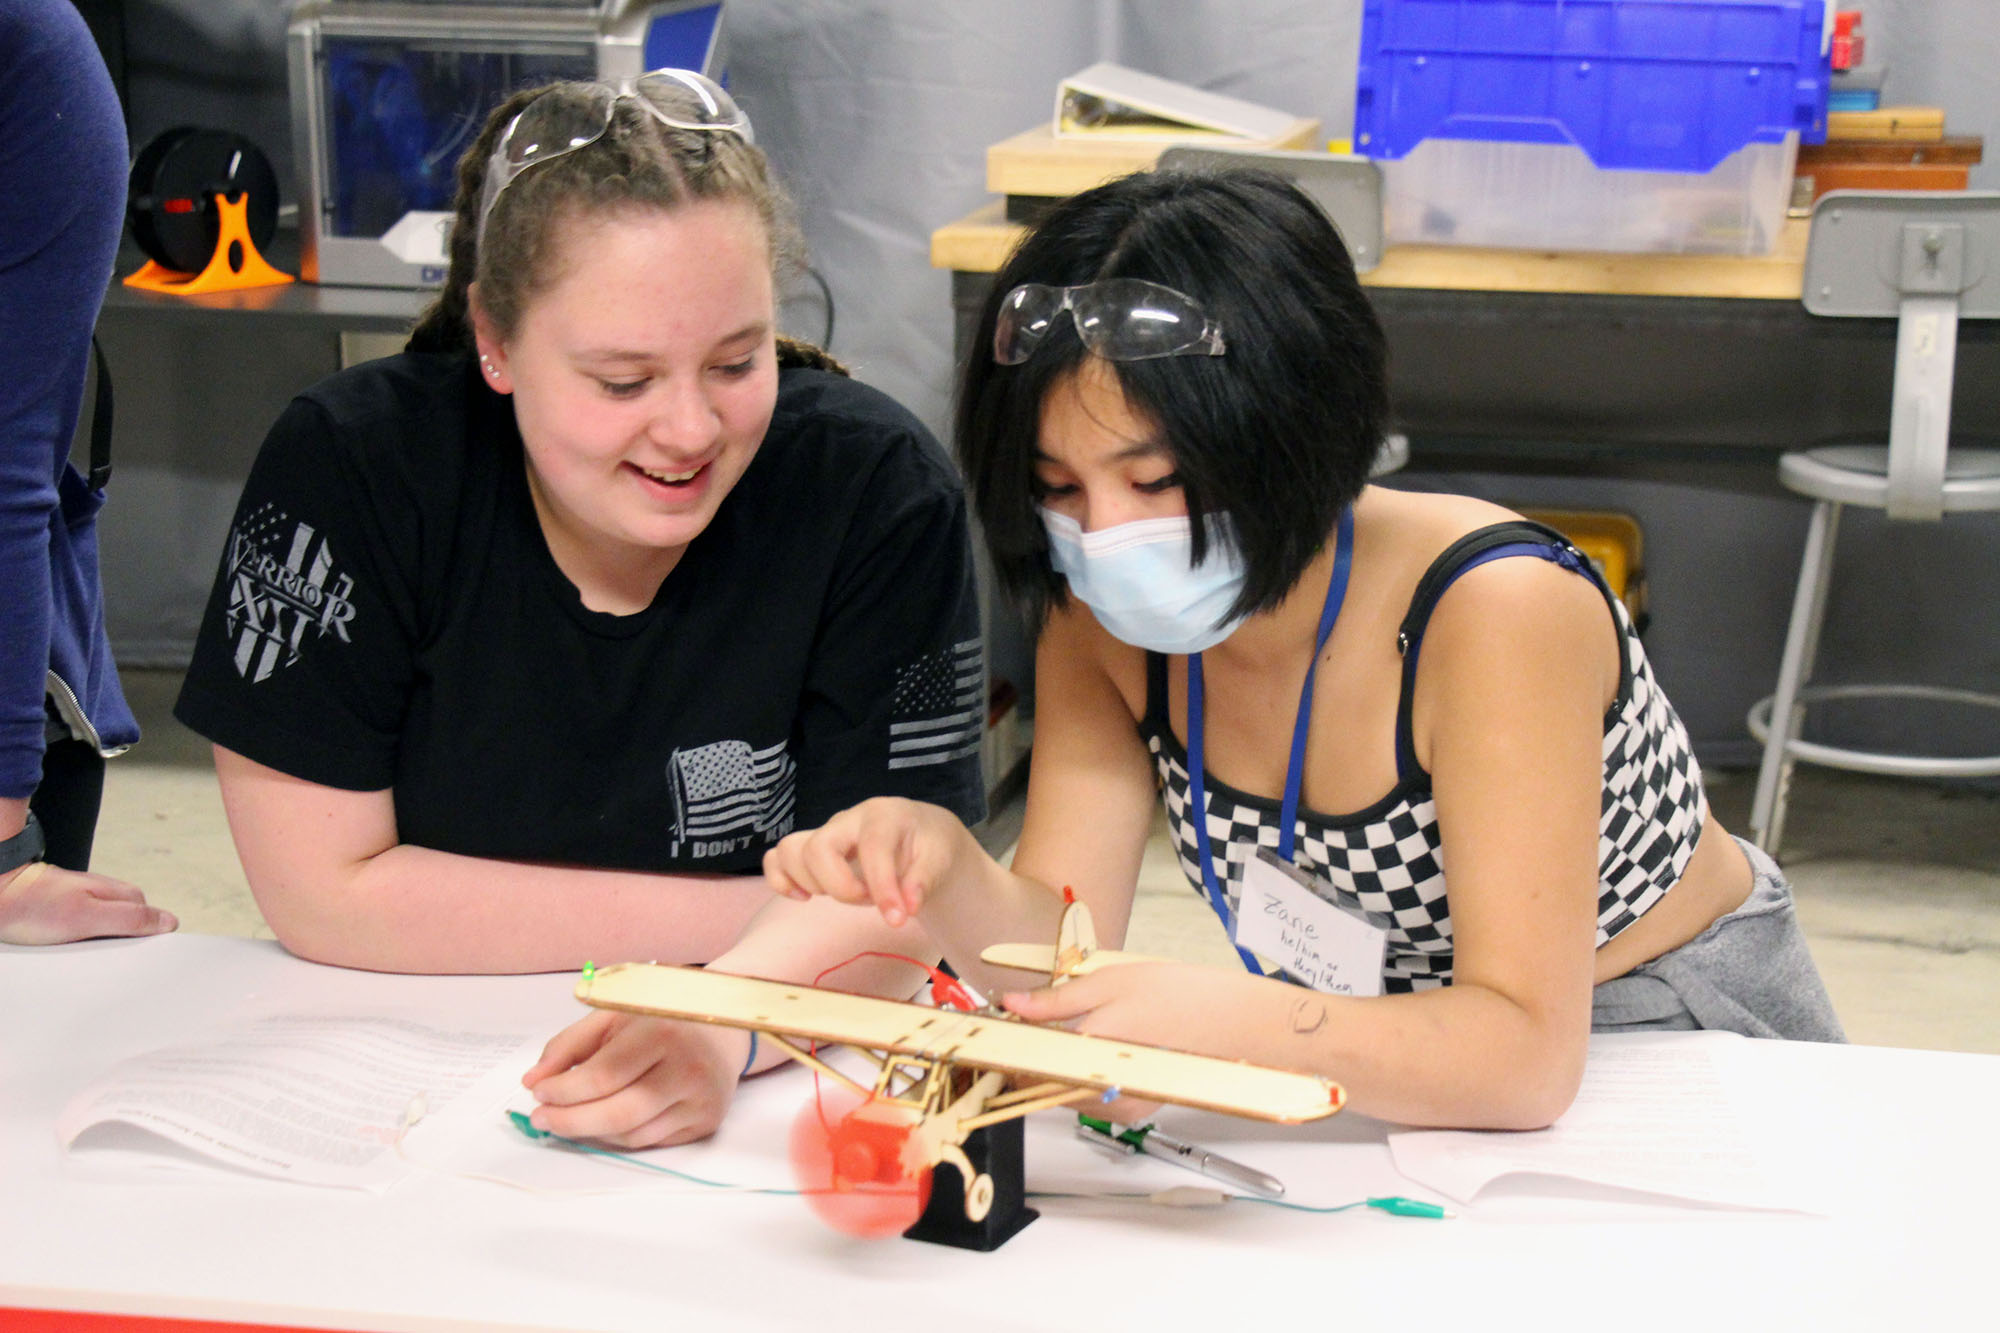 4. Students use wires and circuits to make a propeller spin on a wooden model plane.